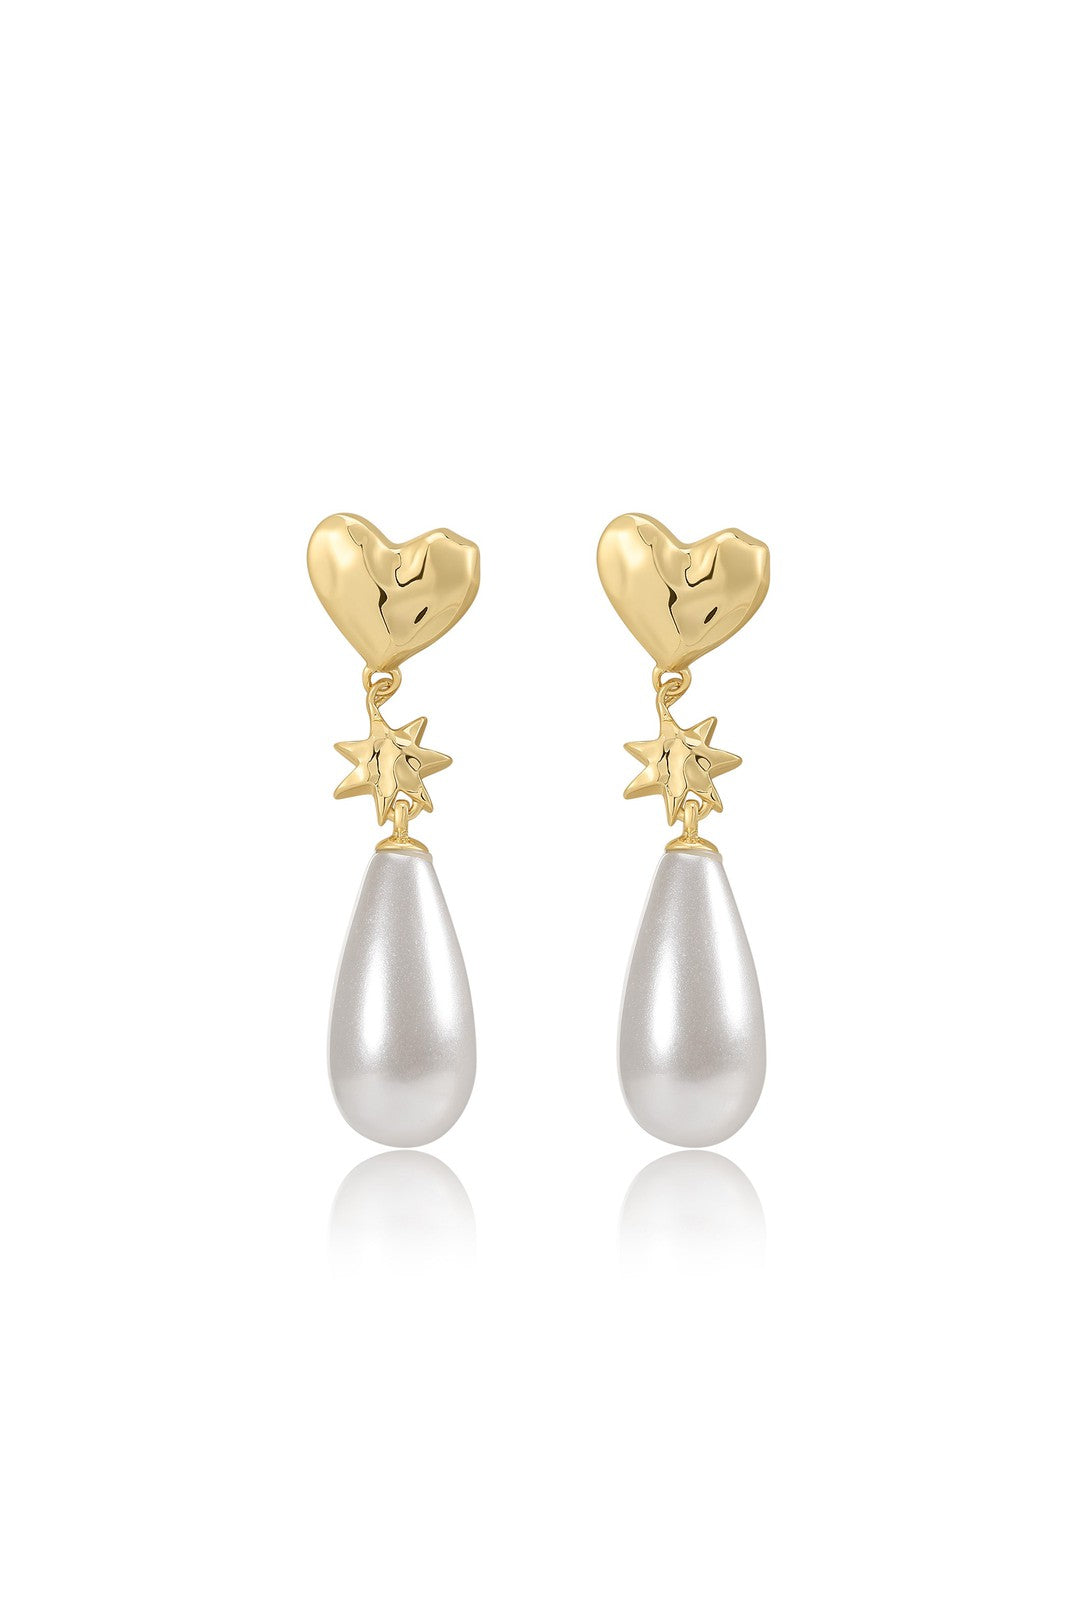 The pearl star studs, gold